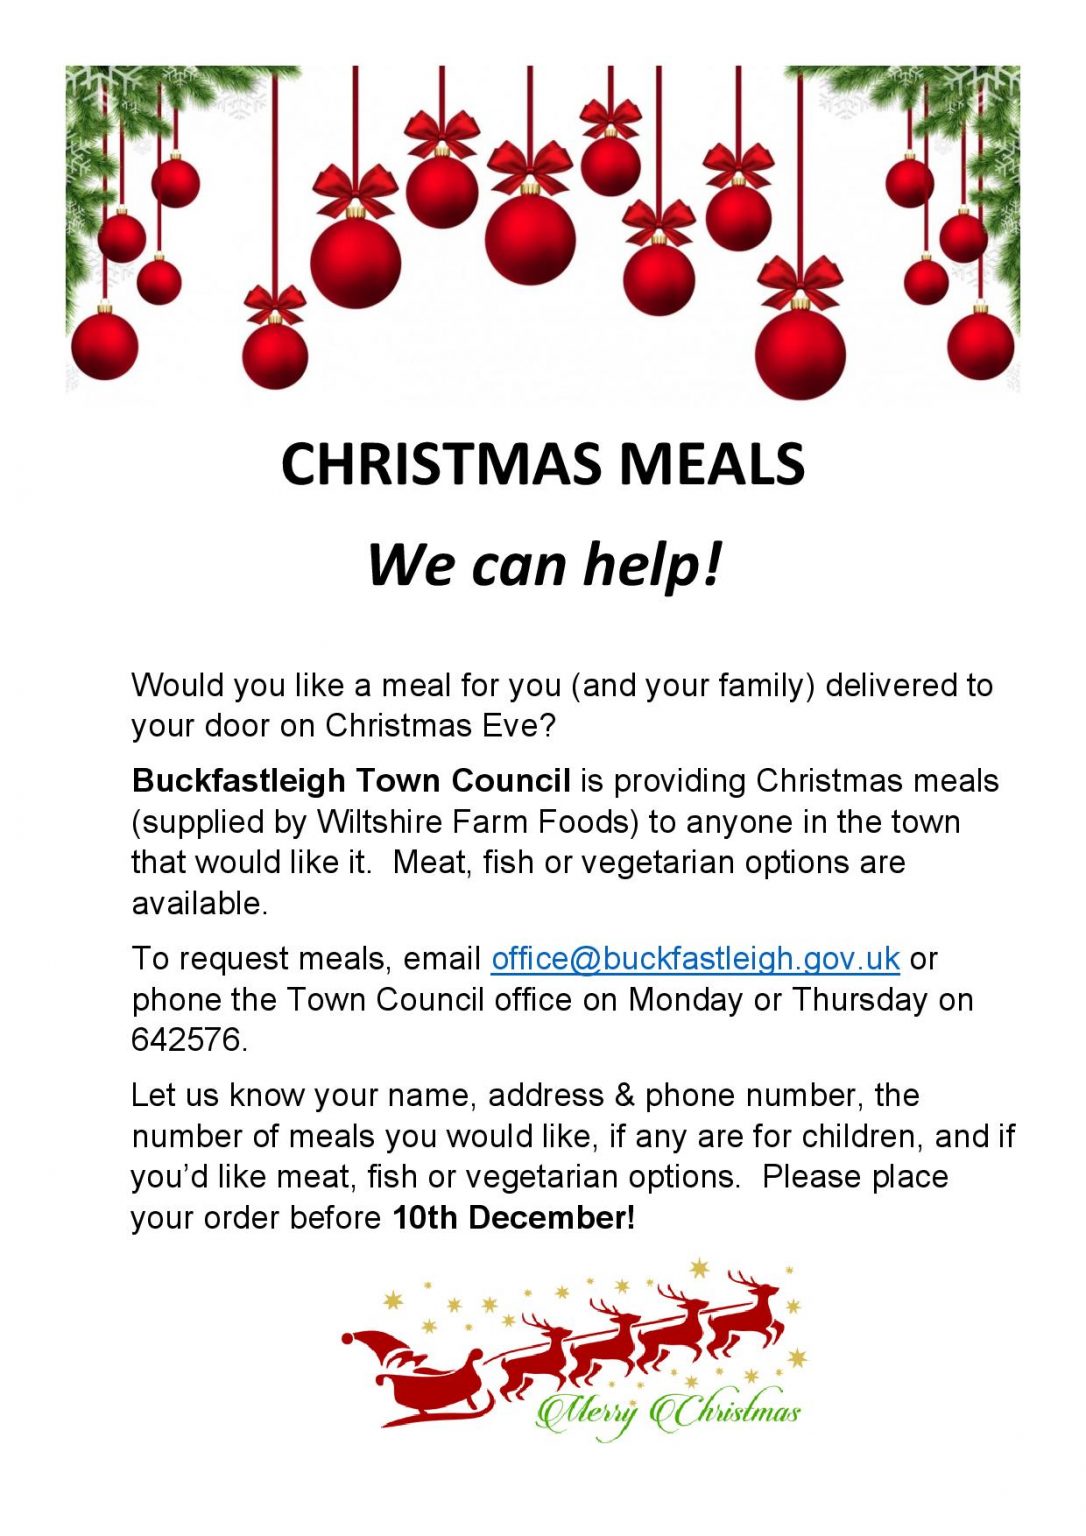 Free Christmas Meals Delivered Buckfastleigh Town Council